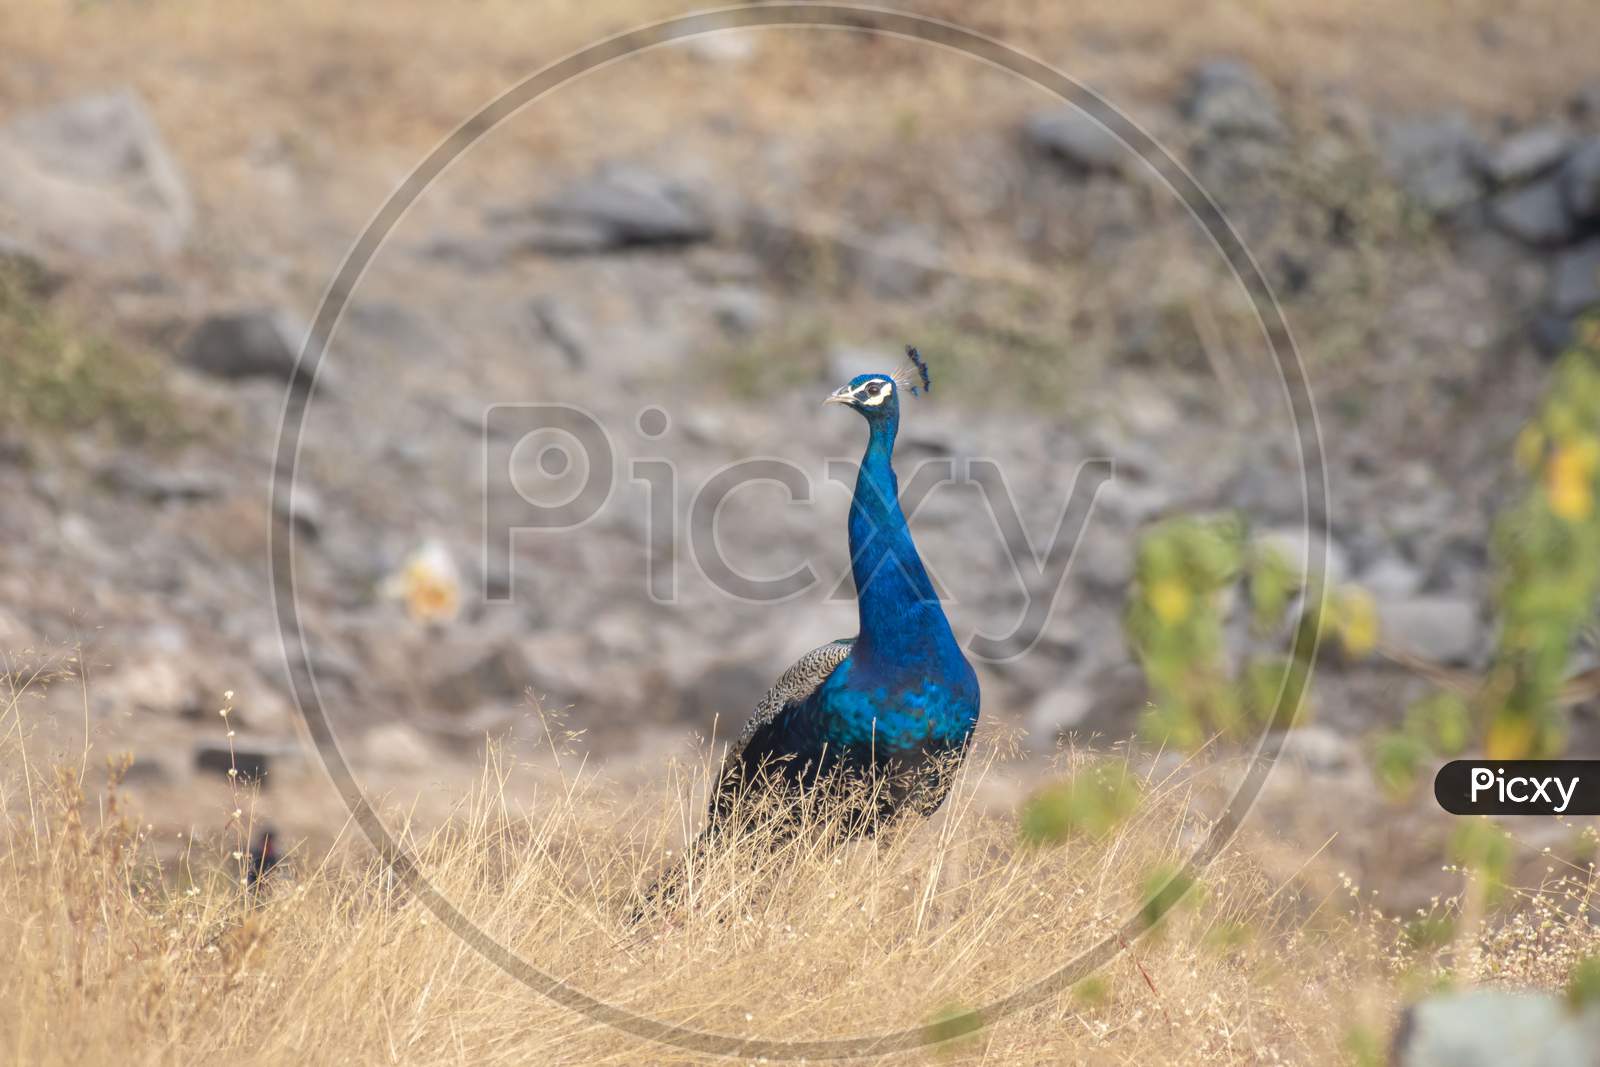 Beautiful Indian Peacock / Peafowl Peeking From The Grassland With Blue Neck And Visible Feathers